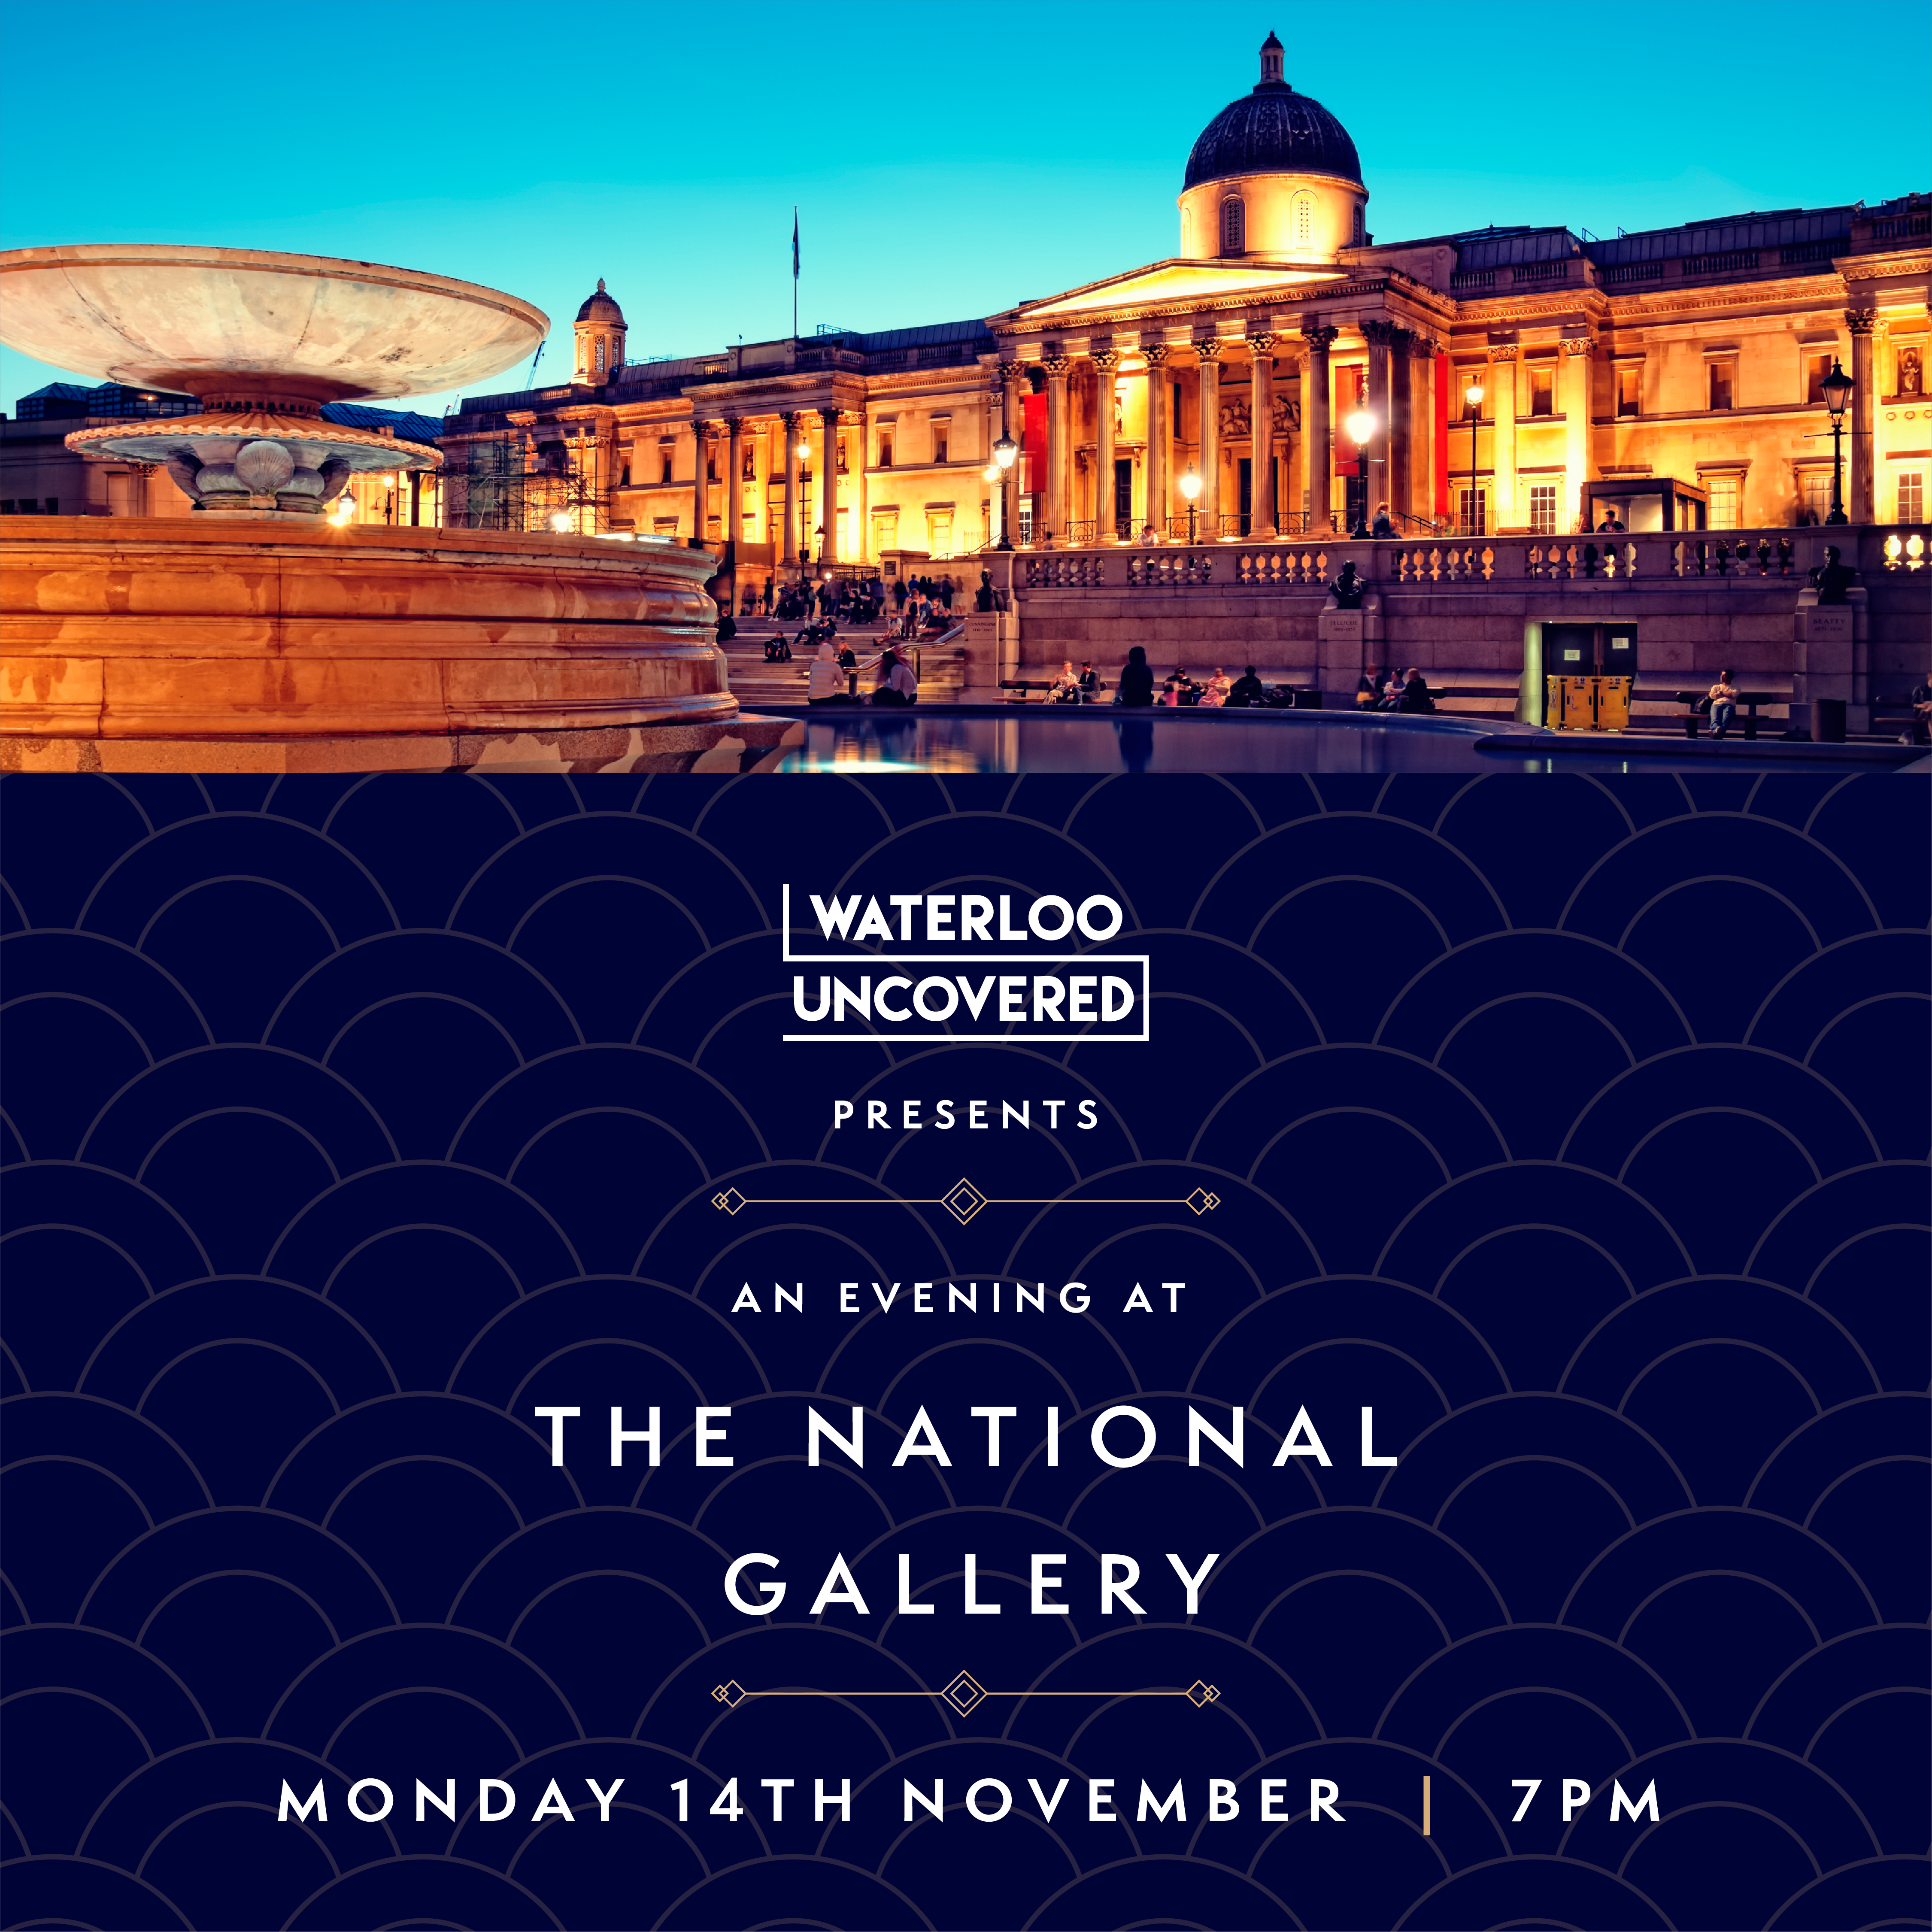 An Evening at the National Gallery